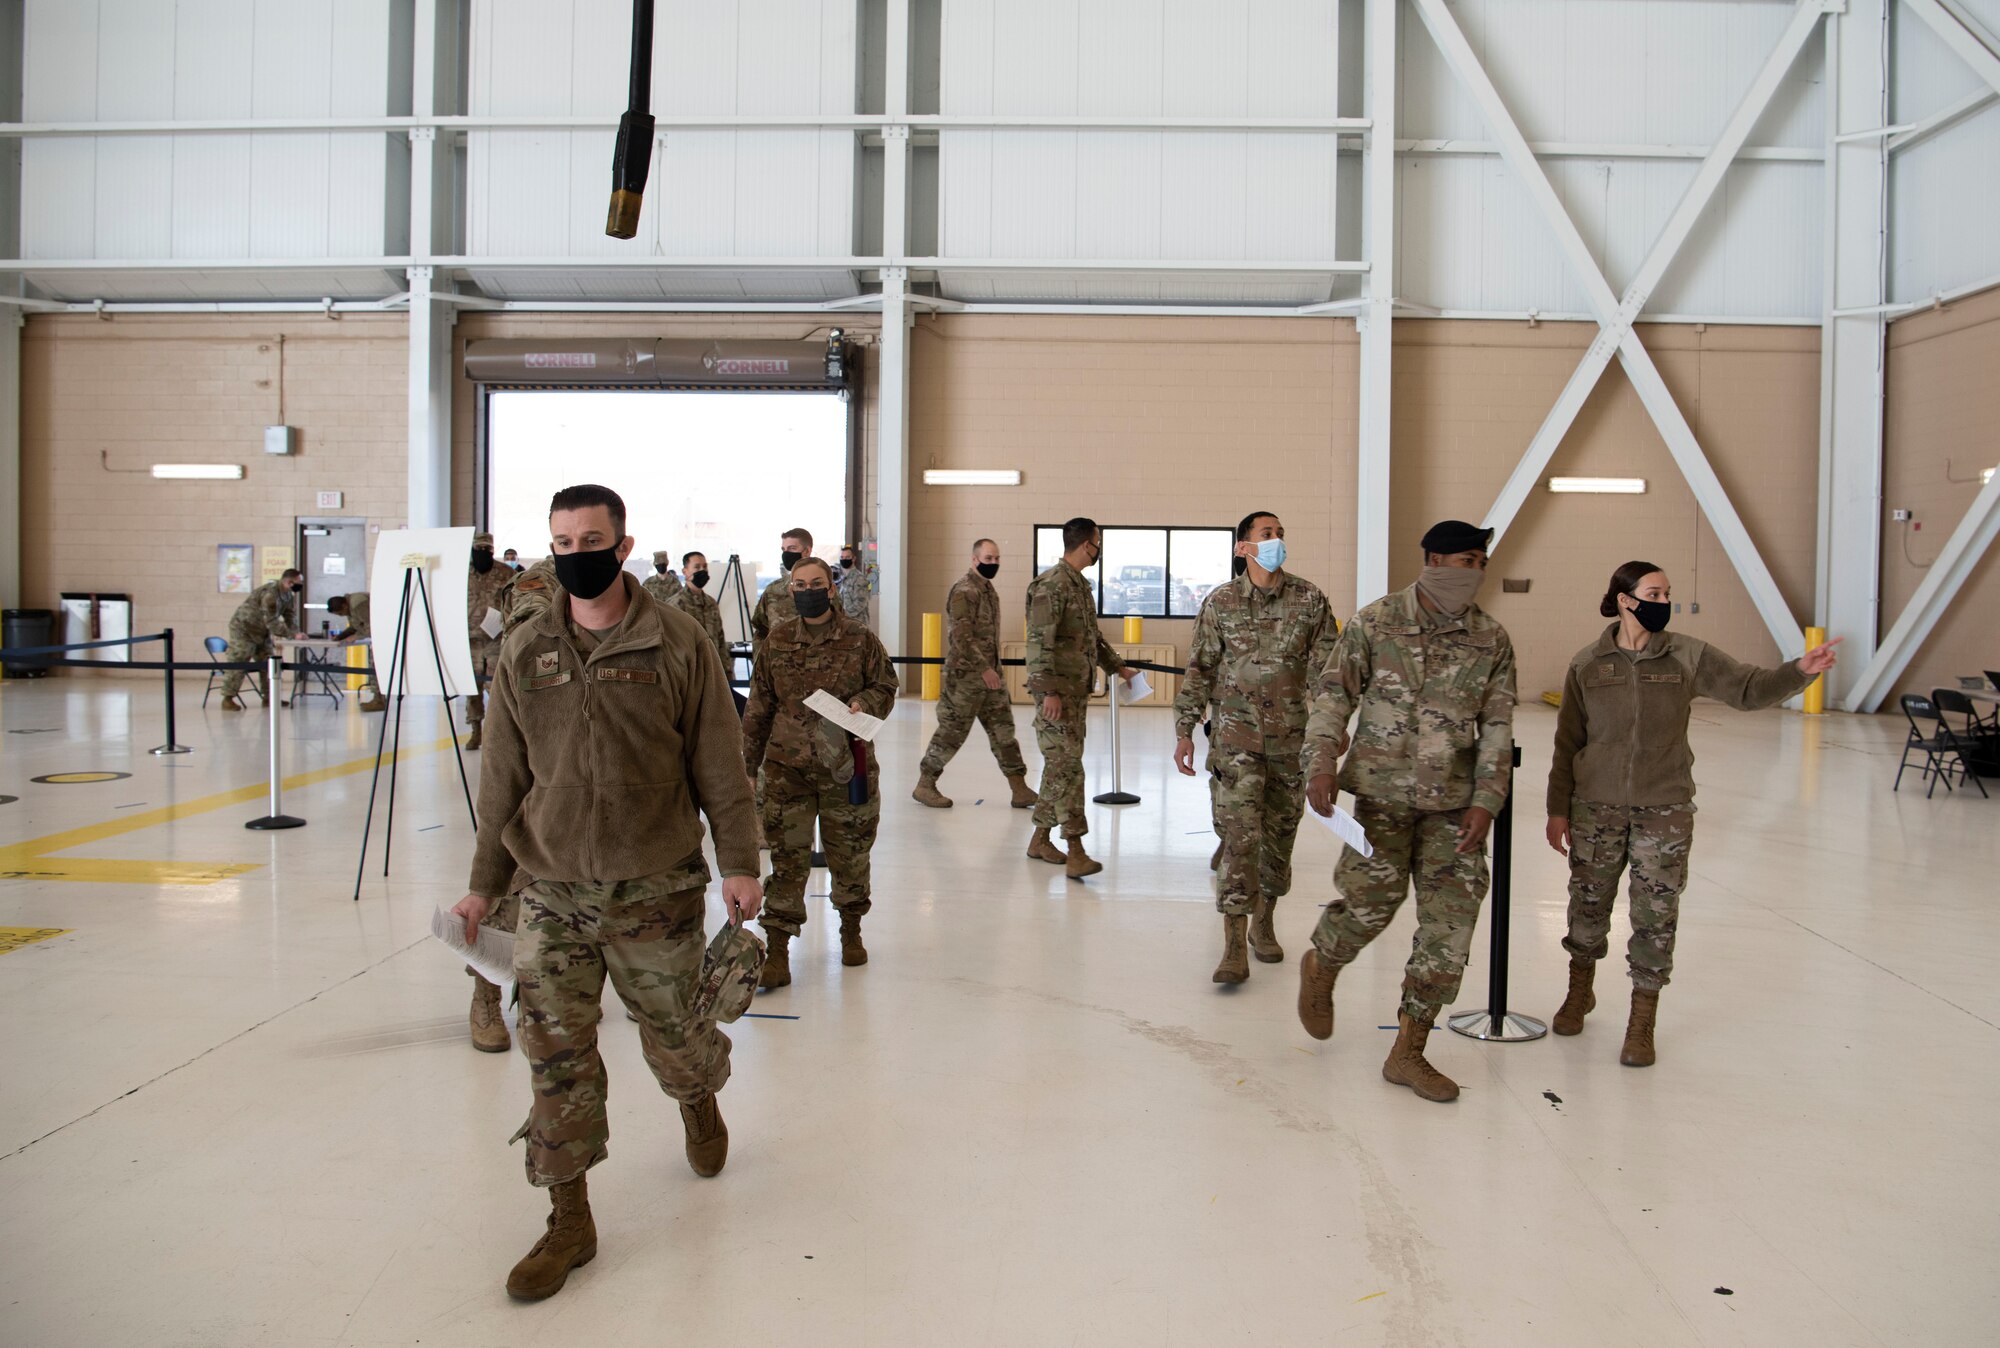 U.S. Airmen arrive at the influenza vaccine point of distribution in a hangar Jan. 14, 2021, at Travis Air Force Base, California. The POD is an organized way of efficiently distributing a vaccine to a large amount of people and preparing medical personnel for future large-scale distributions such as the COVID-19 vaccine. (U.S. Air Force photo by Airman 1st Class Alexander Merchak)